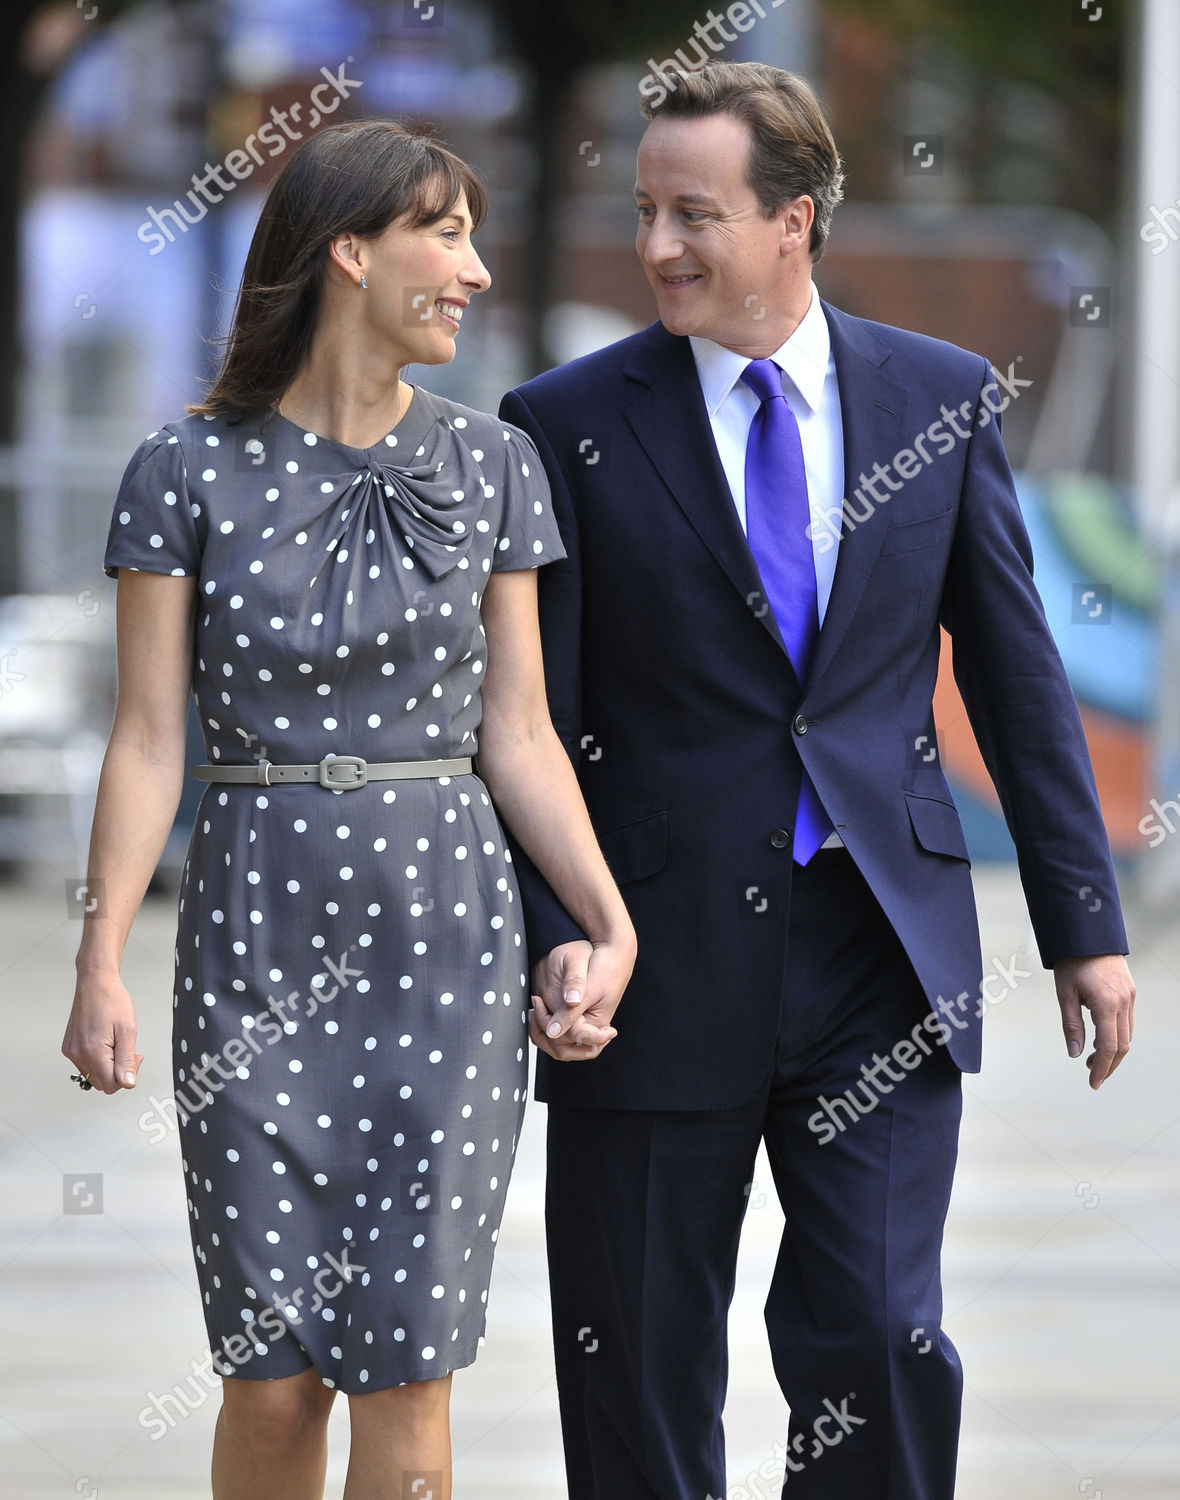 david-and-samantha-cameron-sam-cams-wardrobe-has-been-chosen-with-pr-in-mind-for-her-husbands-big-day-she-wore-a-a65-dove-grey-and-white-polka-dot-1940s-inspired-tea-dress-from-marks-spencer-the-dress-sold-out-in-june-after-becoming-one-of-m-shutterstock-editorial-1954092a.jpg